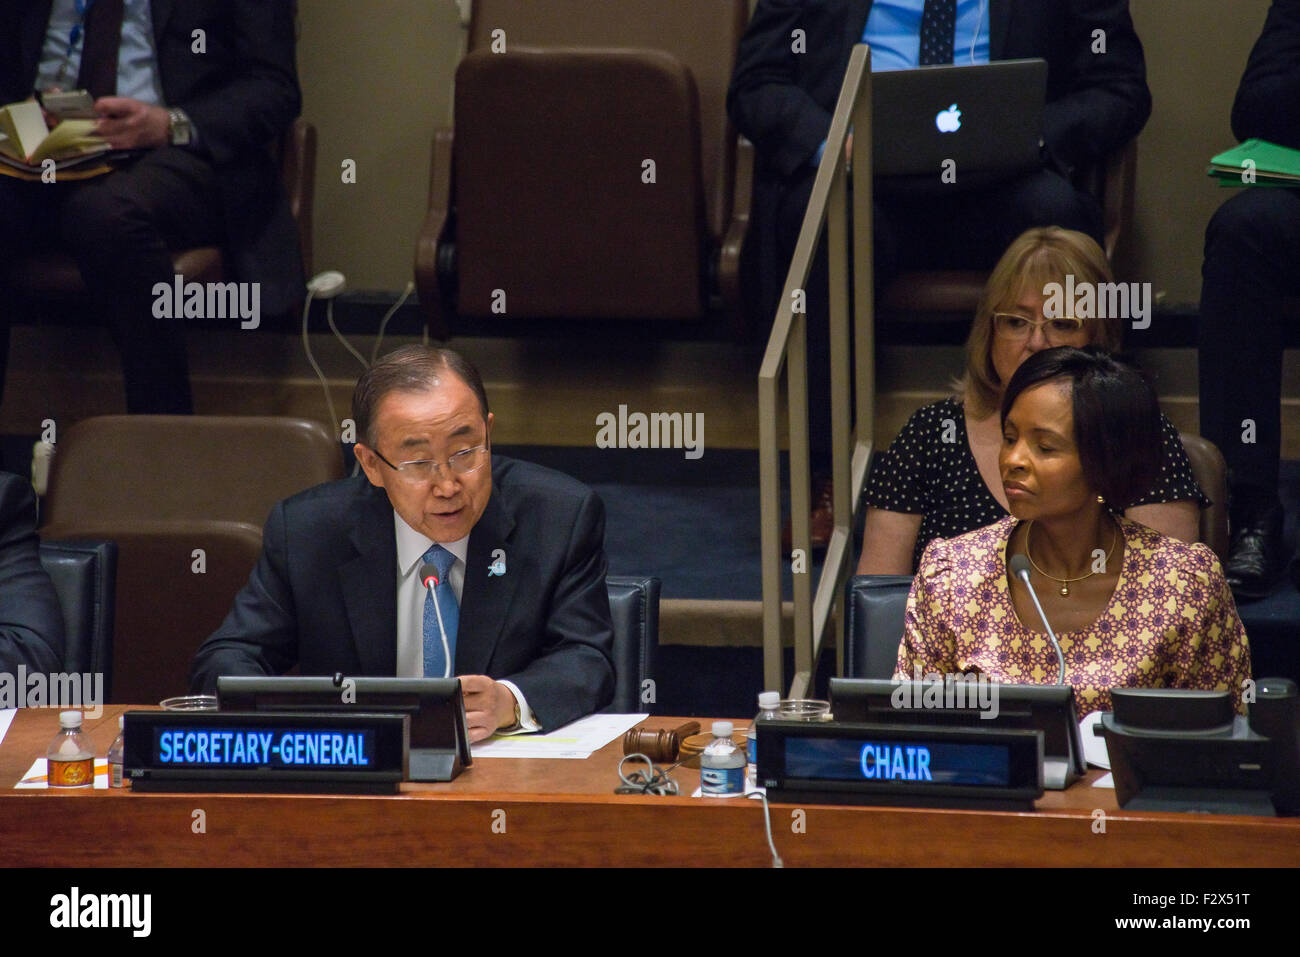 New York, United States. 22nd Sep, 2015. UN Secretary-General Ban Ki-moon (left) and General Assembly President and Ms Maite Nkoana-Mashabane (rigth) during the opening ceremony for the 39th Annual Meeting of Ministers for Foreign Affairs of the Group of 77. © Albin Lohr-Jones/Pacific Press/Alamy Live News Stock Photo